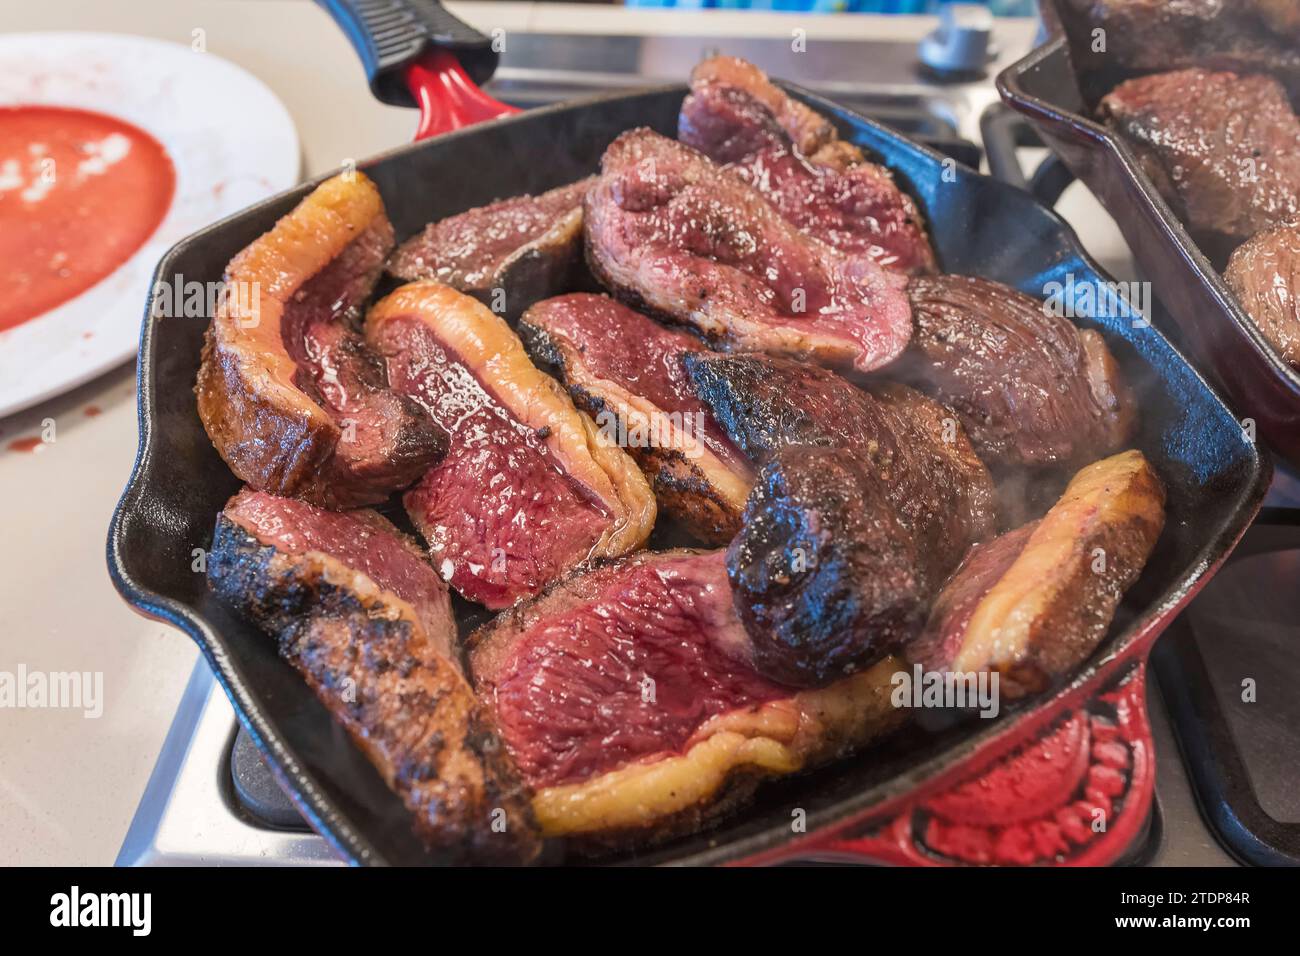 Grilled sirloin or rump fillets seen up close in the frying pan. Stock Photo